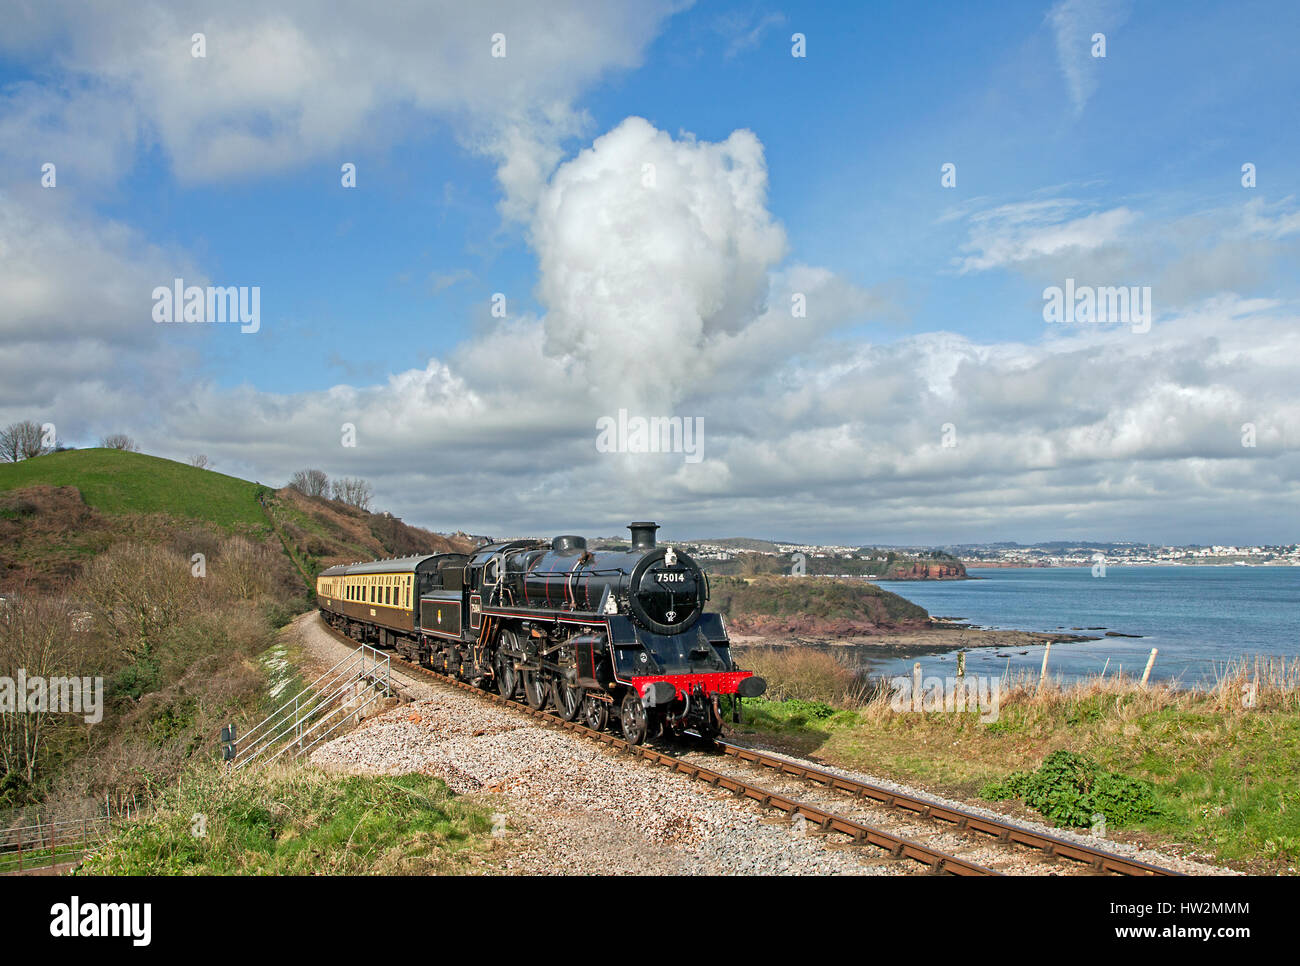 75014 passes 'Waterside' with Tor Bay in the background in Devon during a Timeline photo charter on 12 March 2017. The loco is about to start its firs Stock Photo